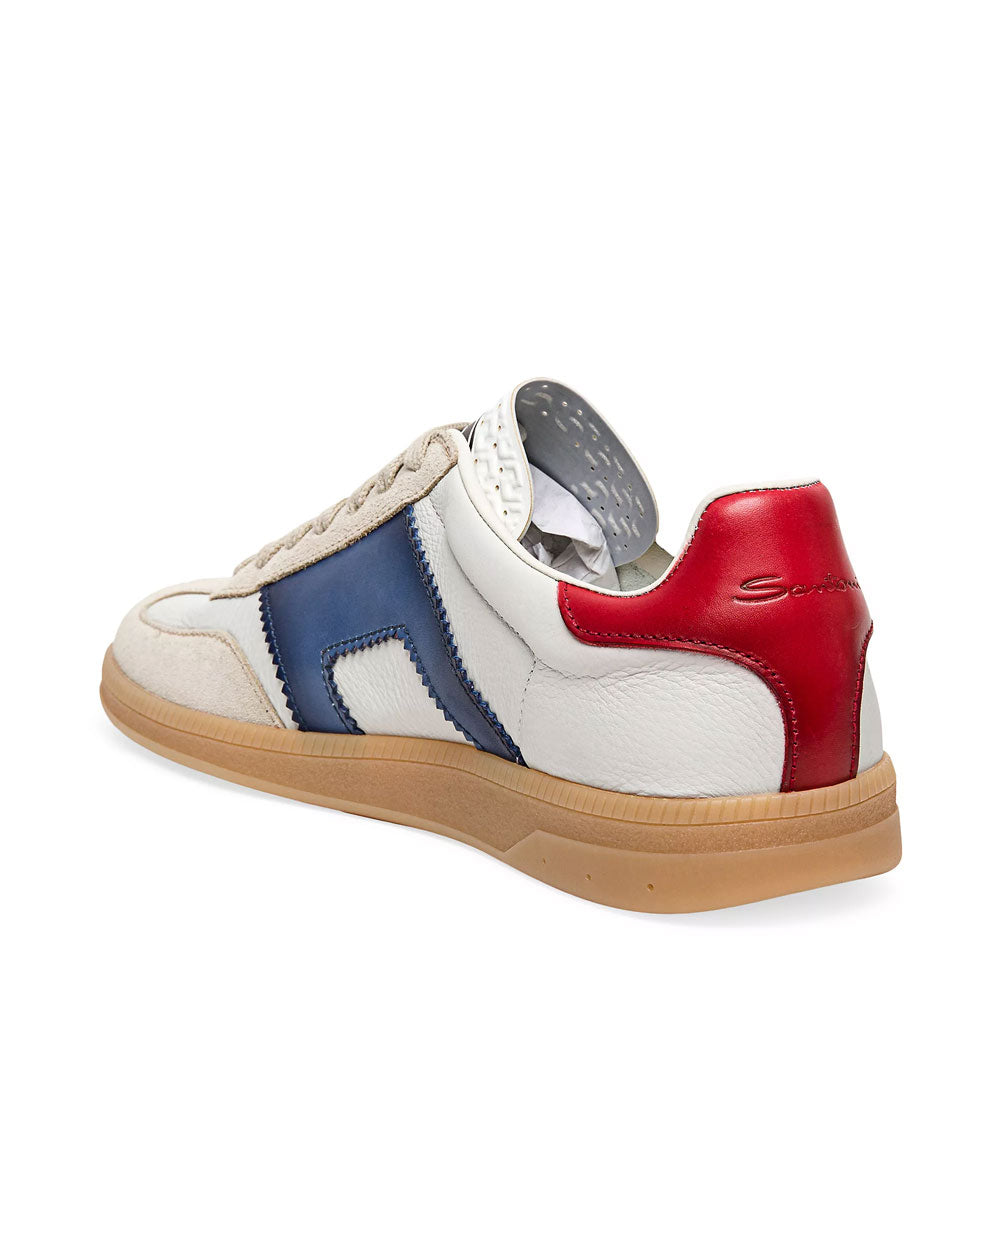 Olympic Sneaker in Red and White